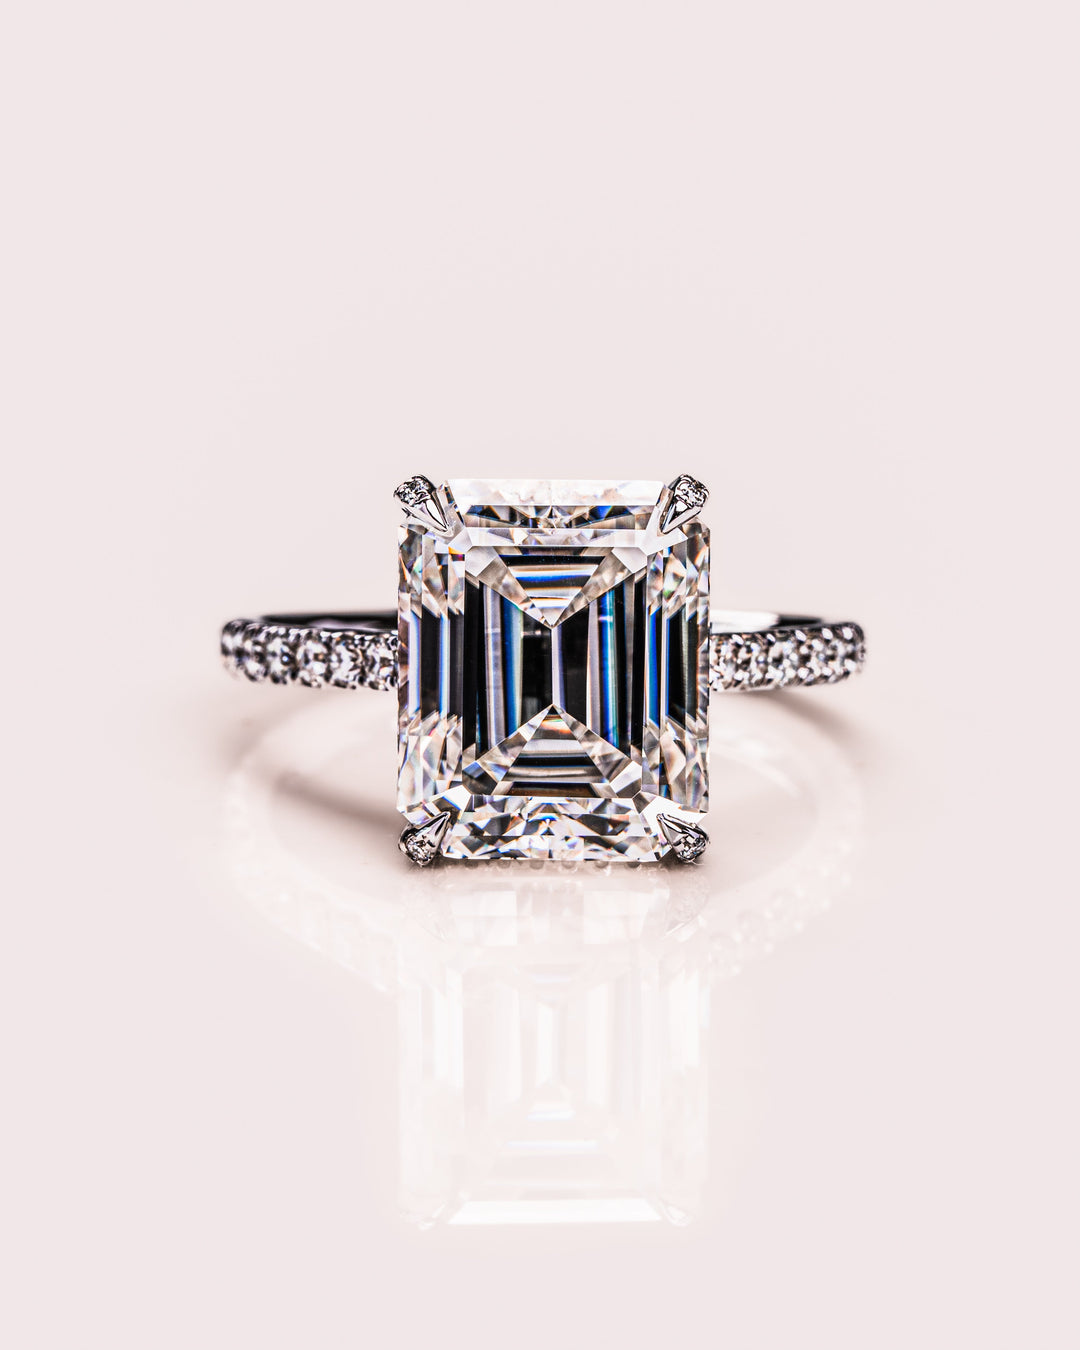 3.42 CT Emerald Cut Solitaire Moissanite Engagement Ring With Hidden Halo Setting